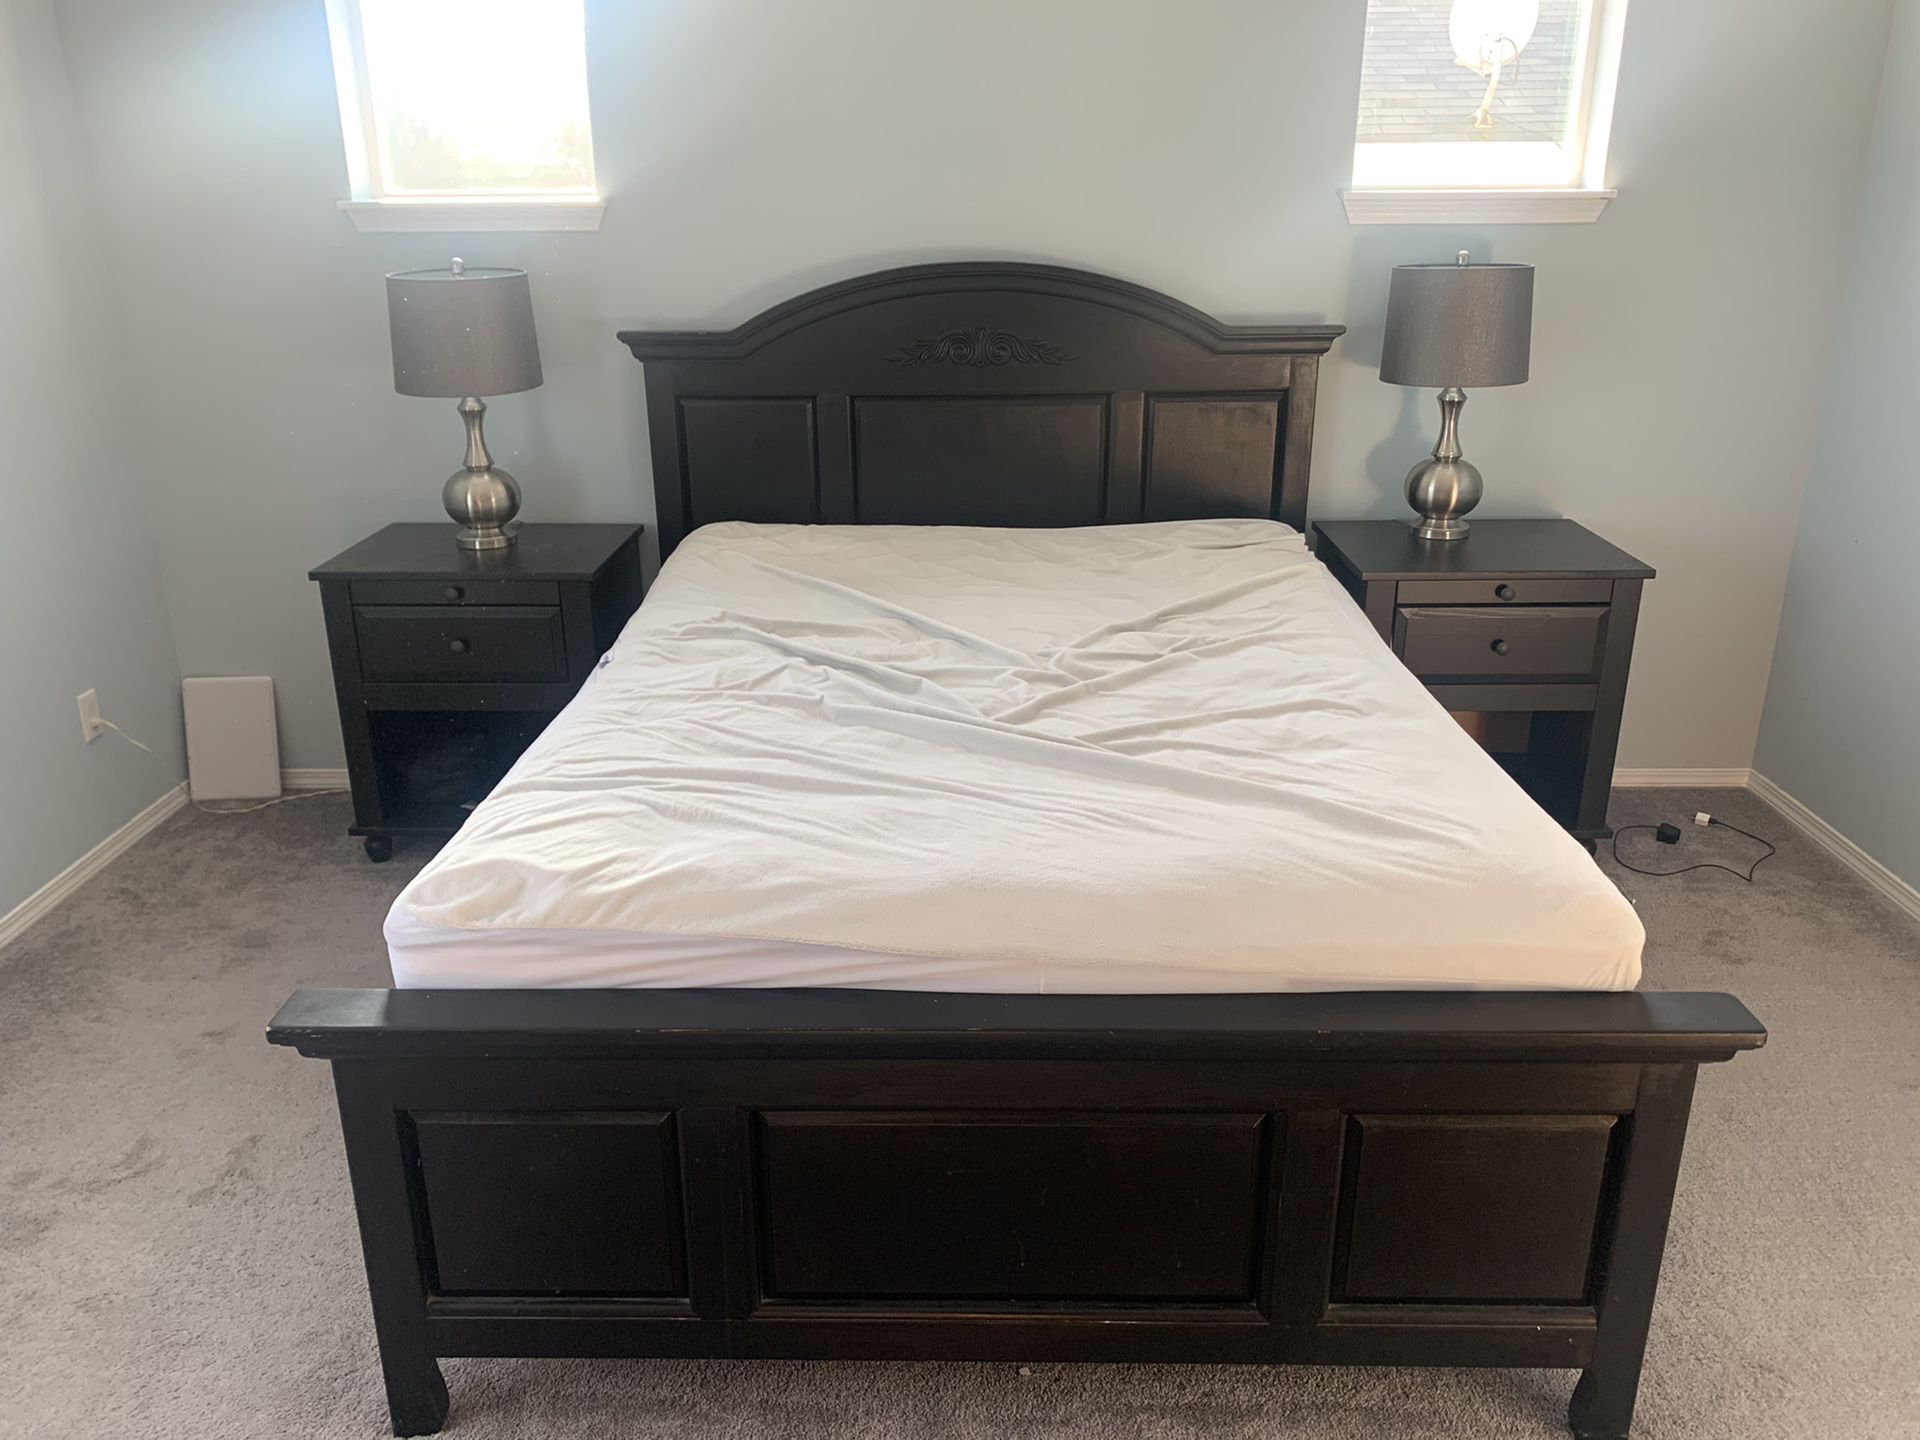 Queen Size Bed Frame and Ikea Nightstands